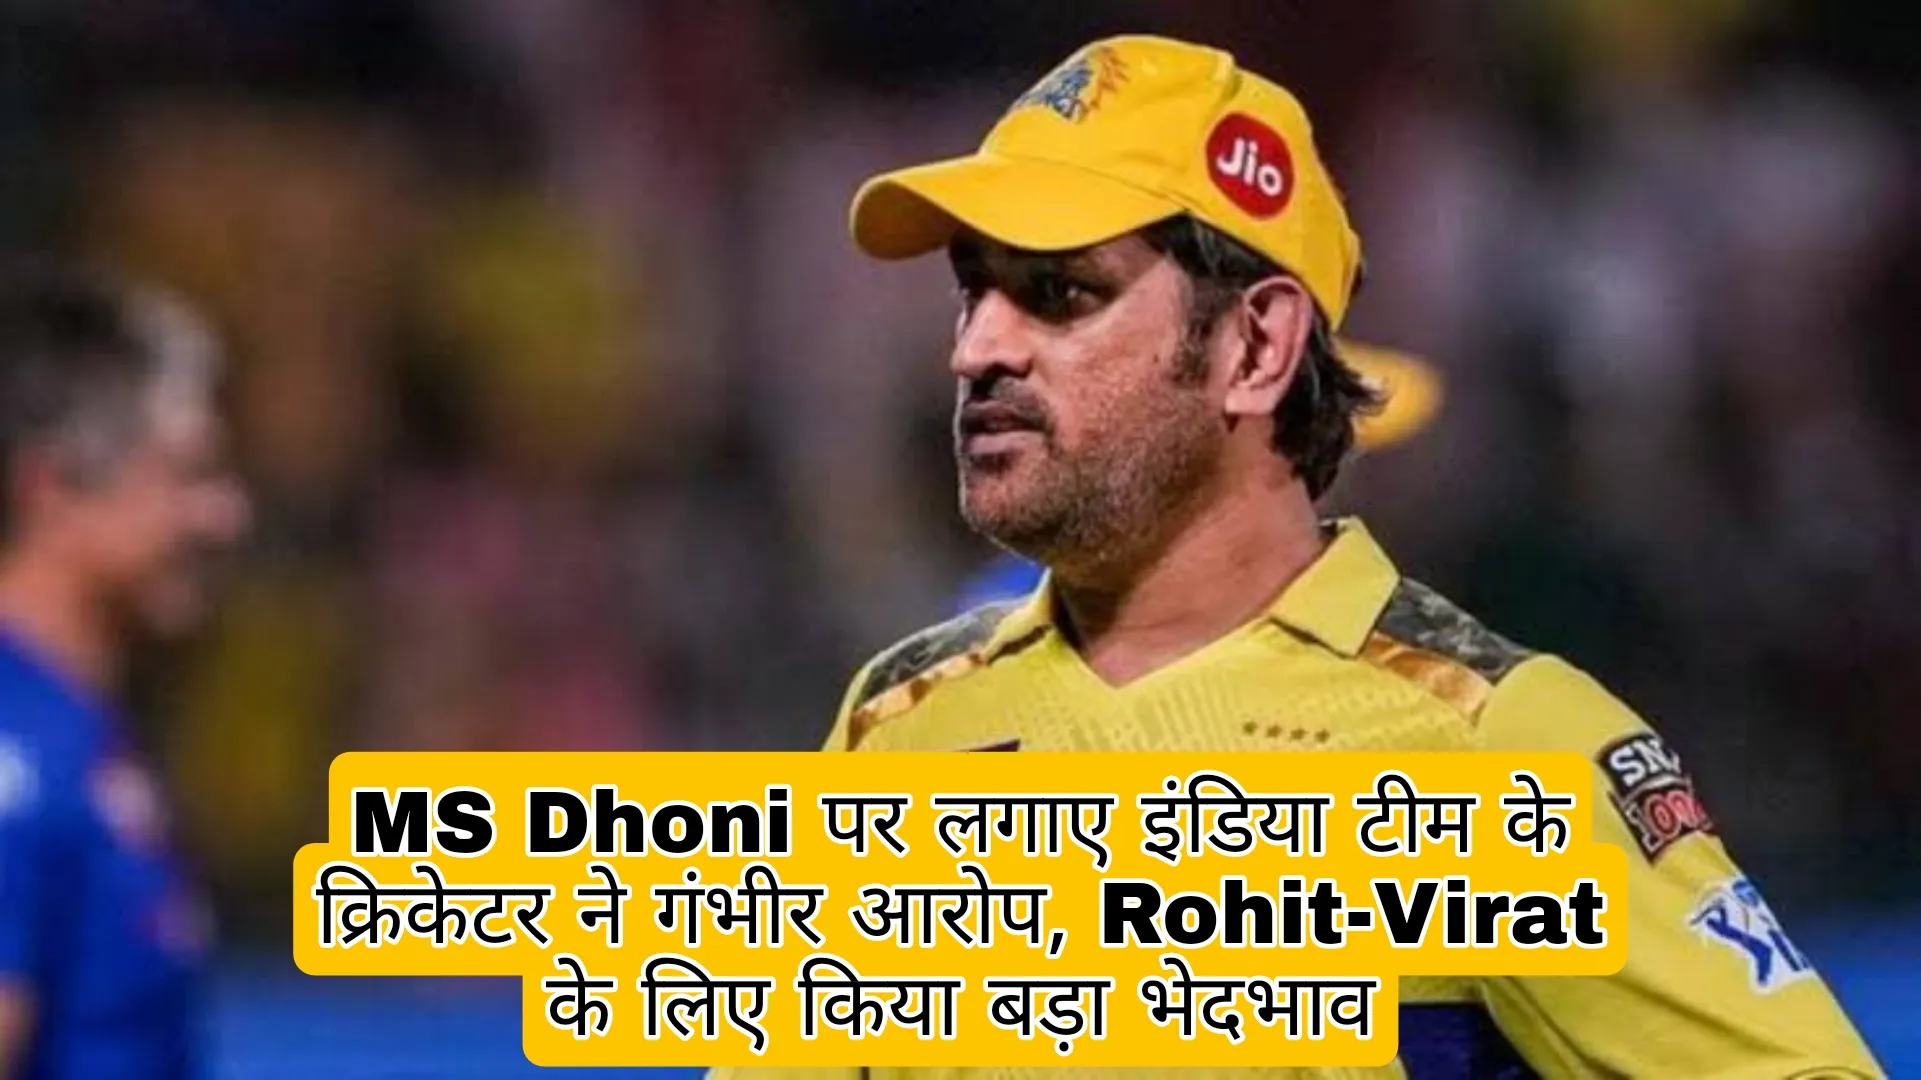 Serious Allegations Against MS Dhoni